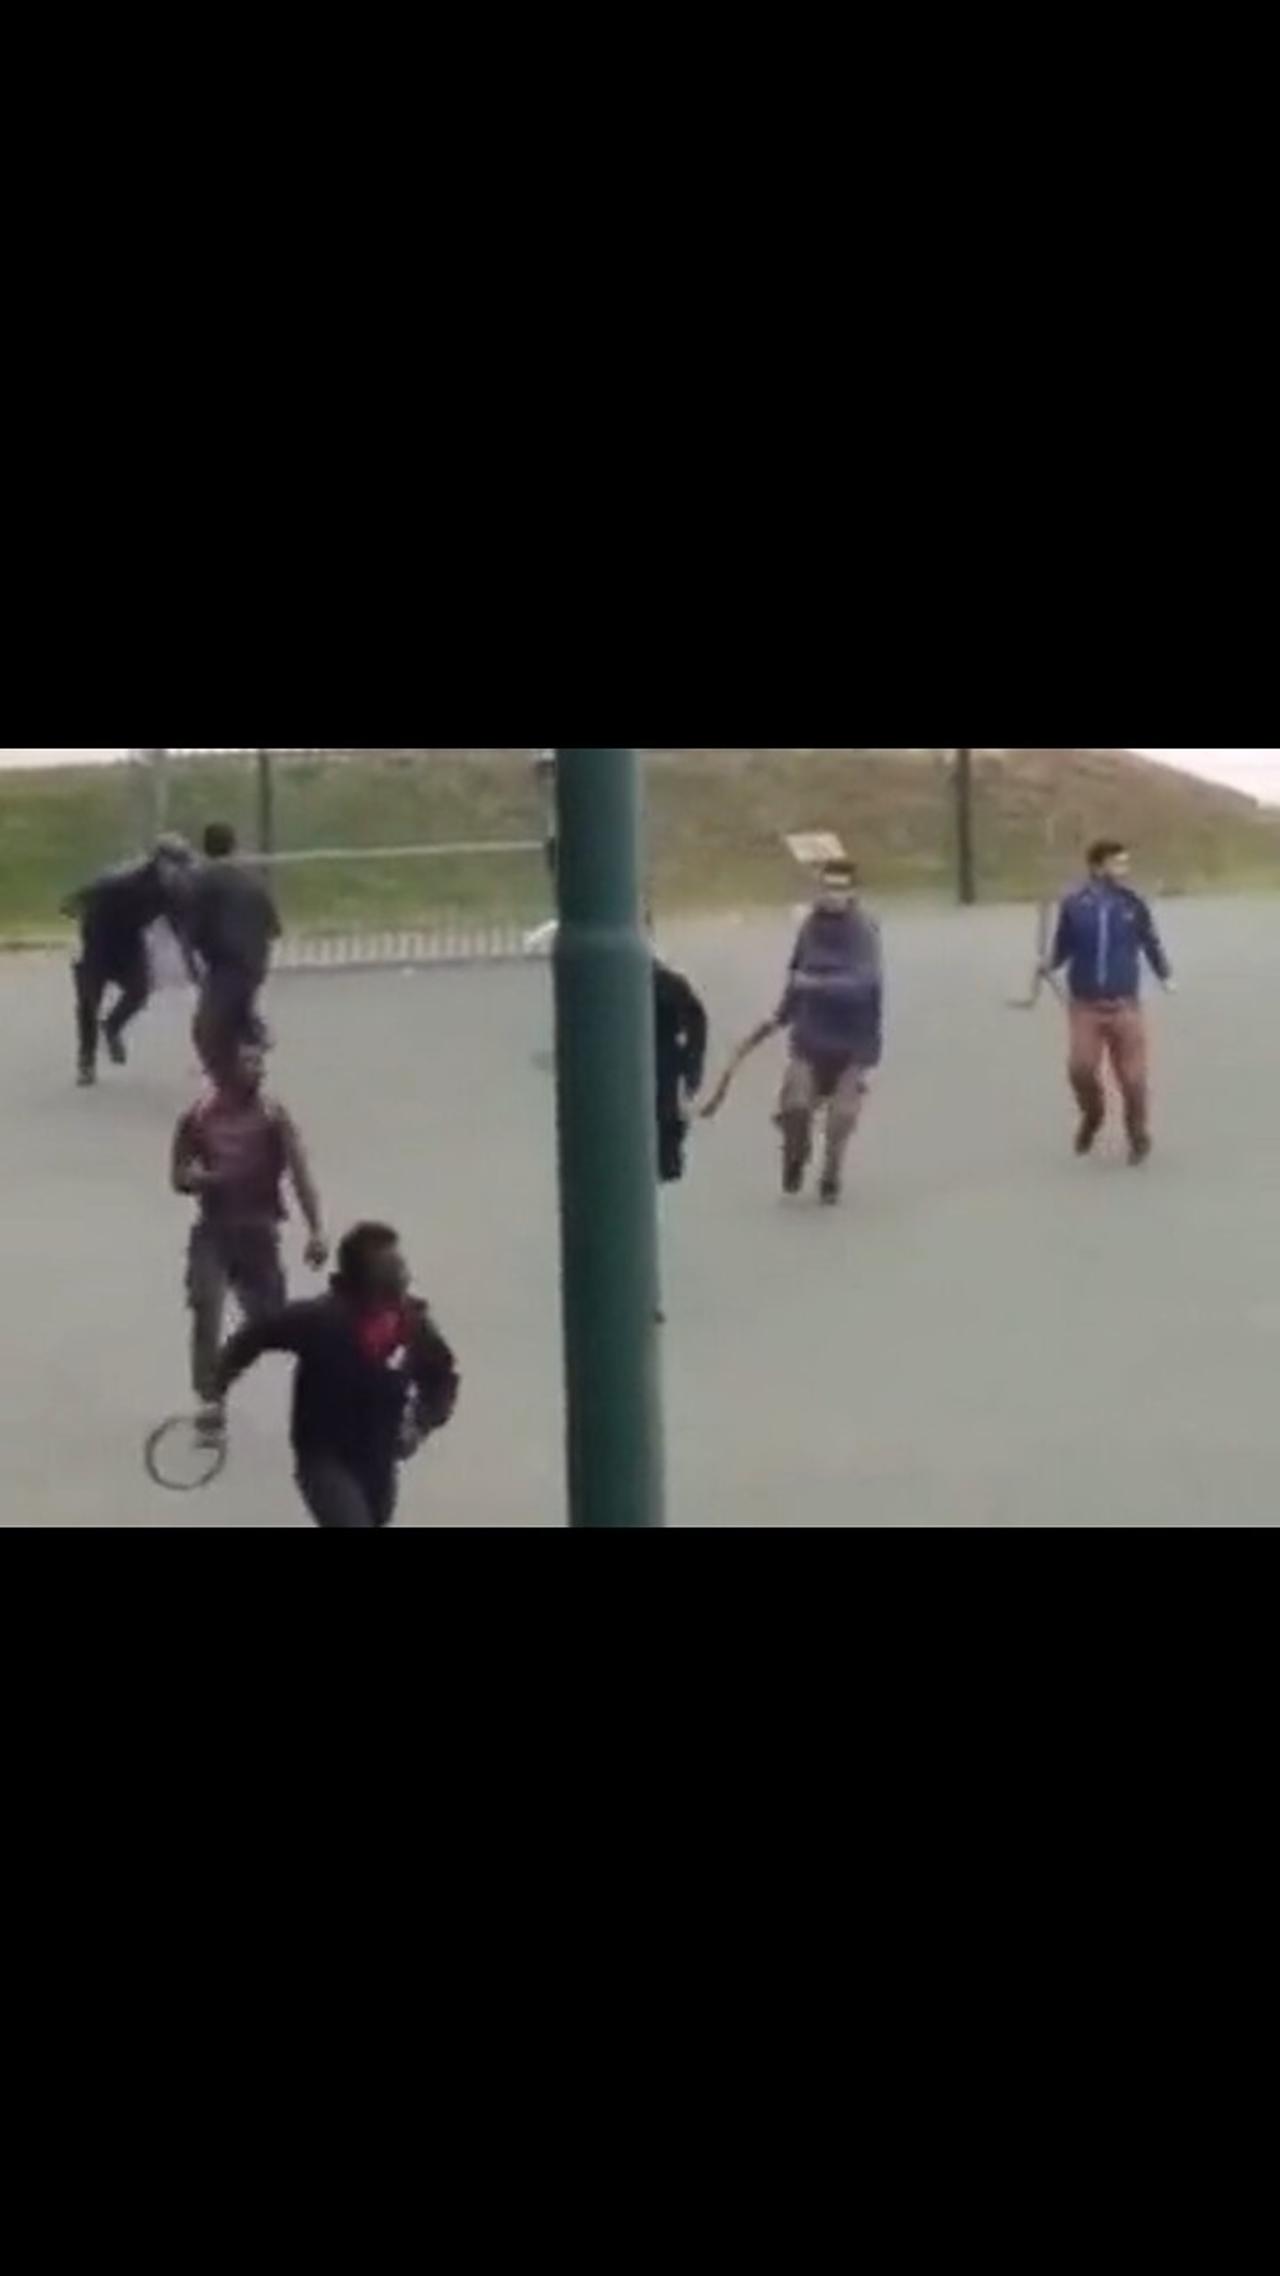 Afghans & Africans trying to murder each other with machetes & sticks at a park in Italy